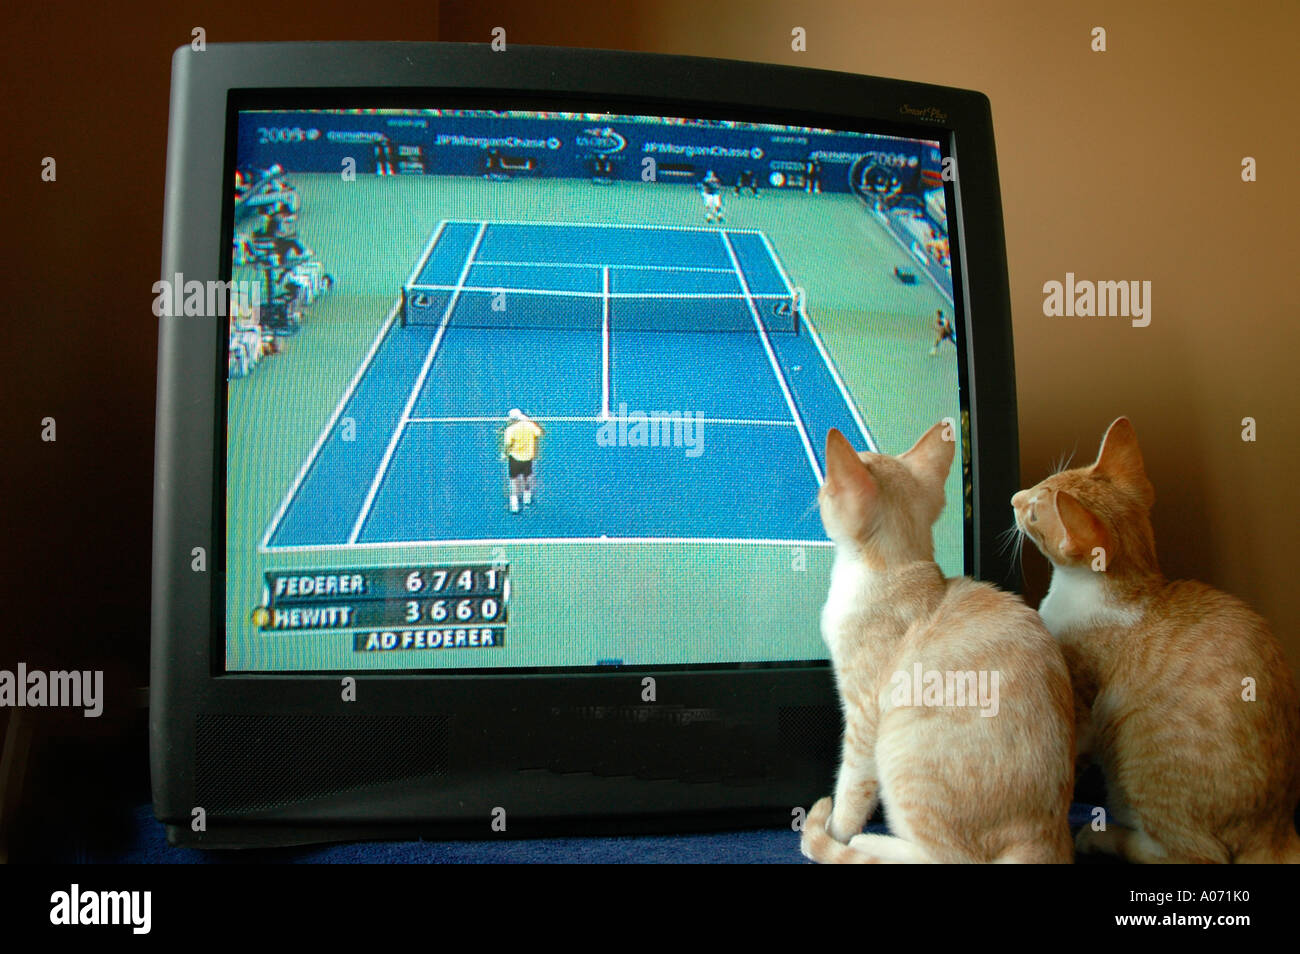 Cats kittens watching tennis match at Wimbledon on Television Stock Photo